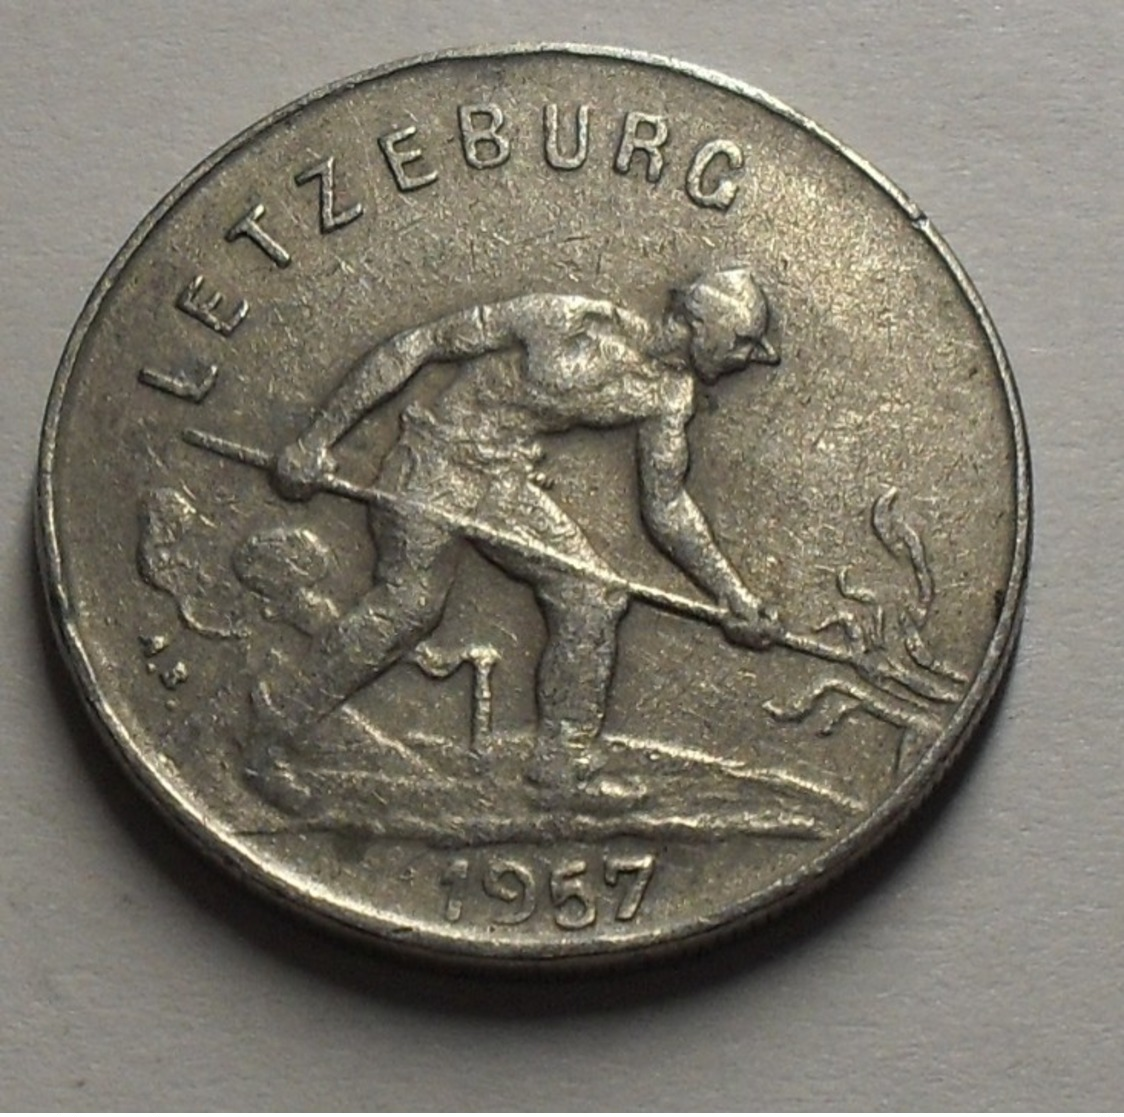 1957 - Luxembourg - 1 FRANC, Charlotte, KM 46.2 - Luxembourg